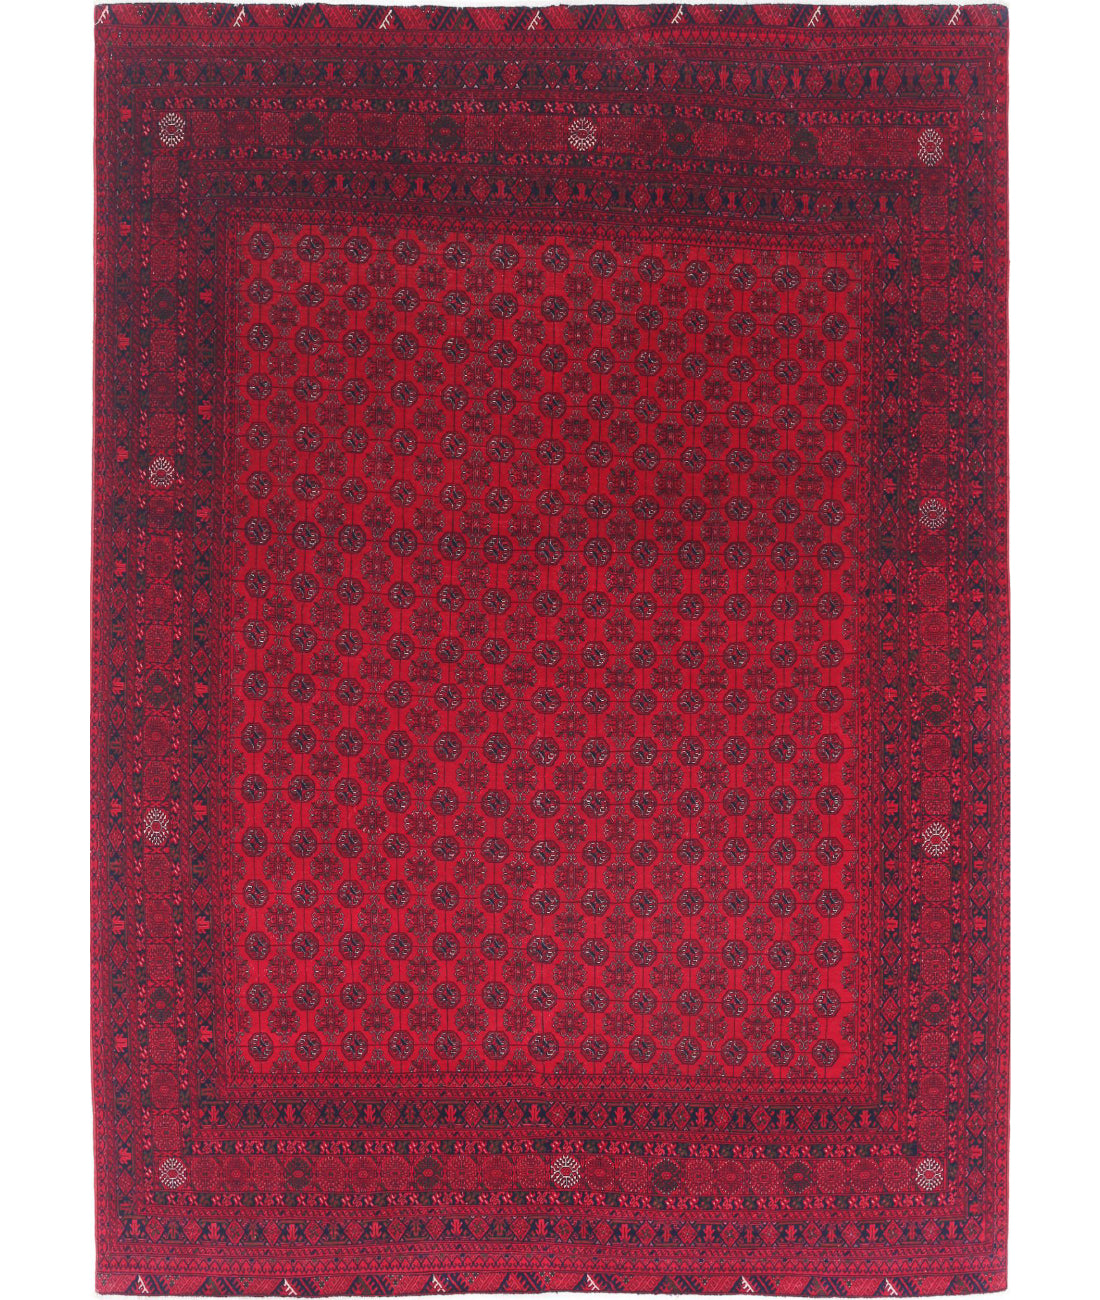 Hand Knotted Afghan Beljik Wool Rug - 6'7'' x 9'4'' 6'7'' x 9'4'' (198 X 280) / Red / Red